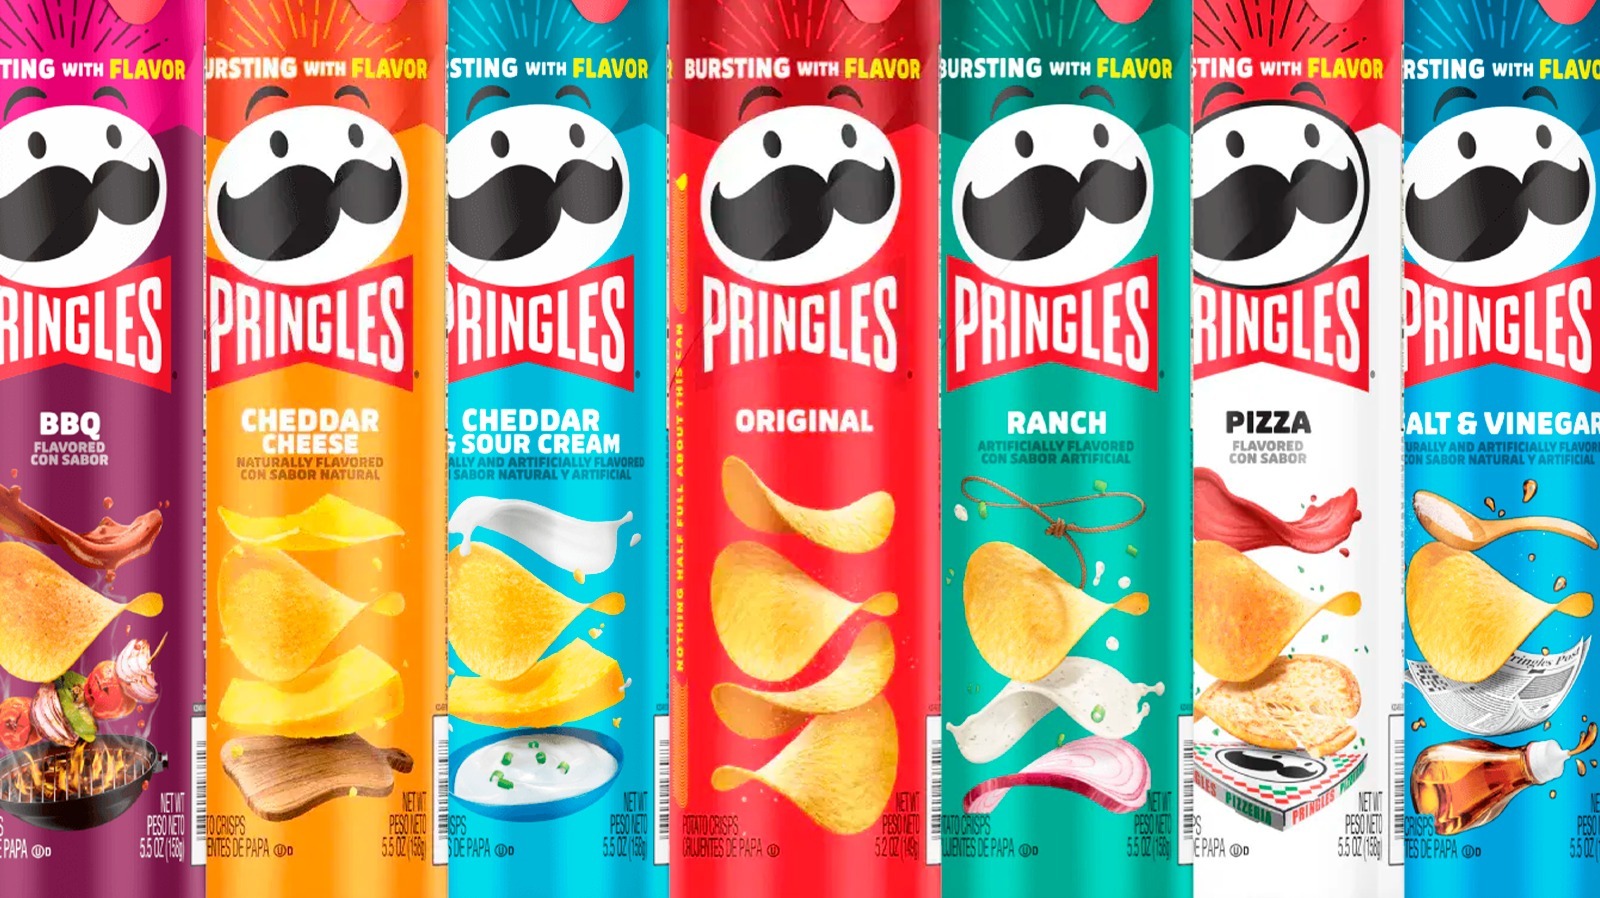 We Tried Every Single Pringles Flavor, Here's How They Ranked